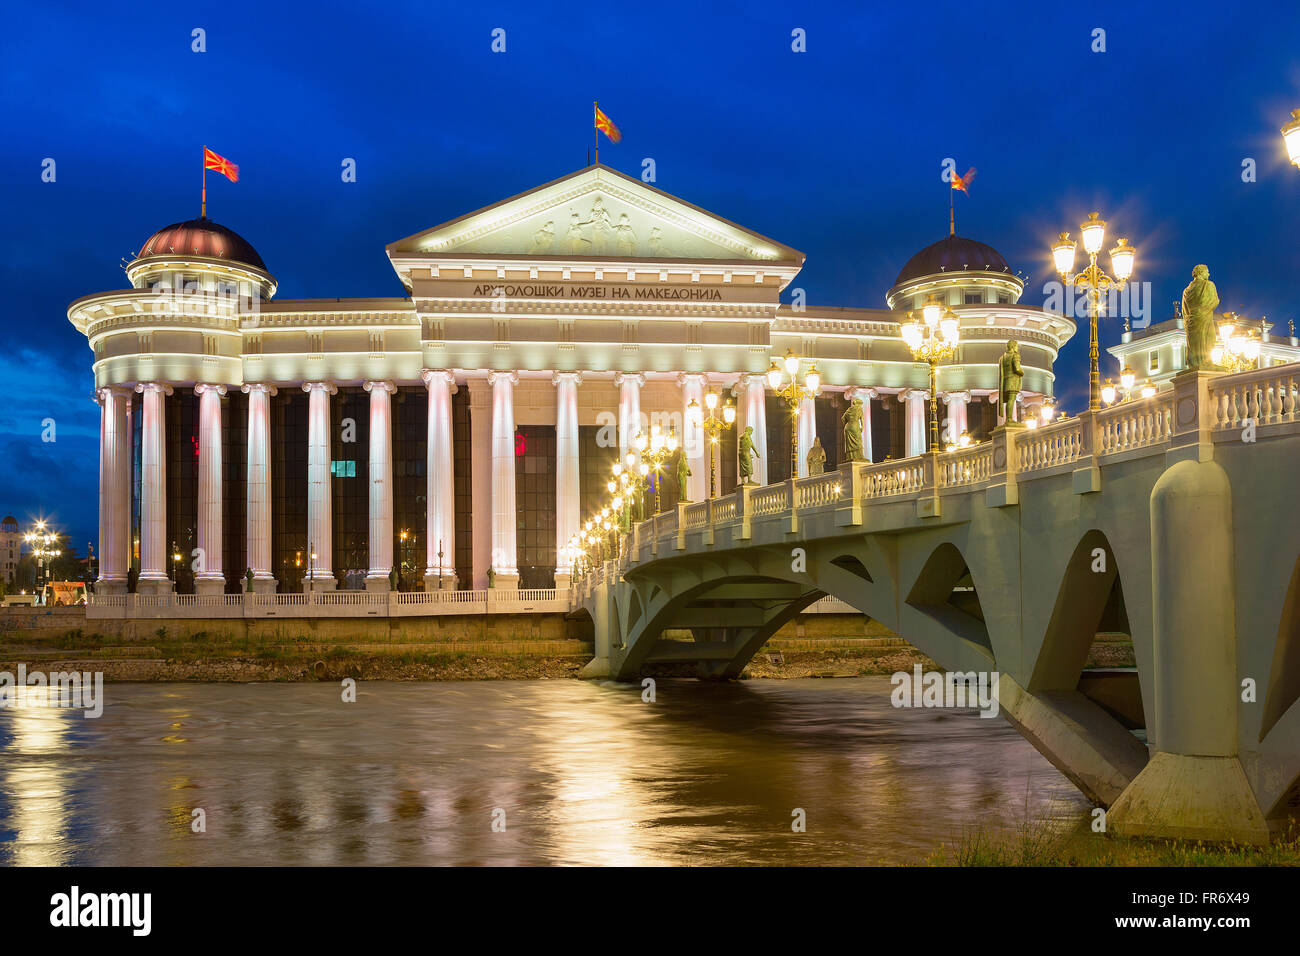 Republic of Macedonia, Skopje, the Archeological Museum of Macedonia and the bridge of civilizations Stock Photo